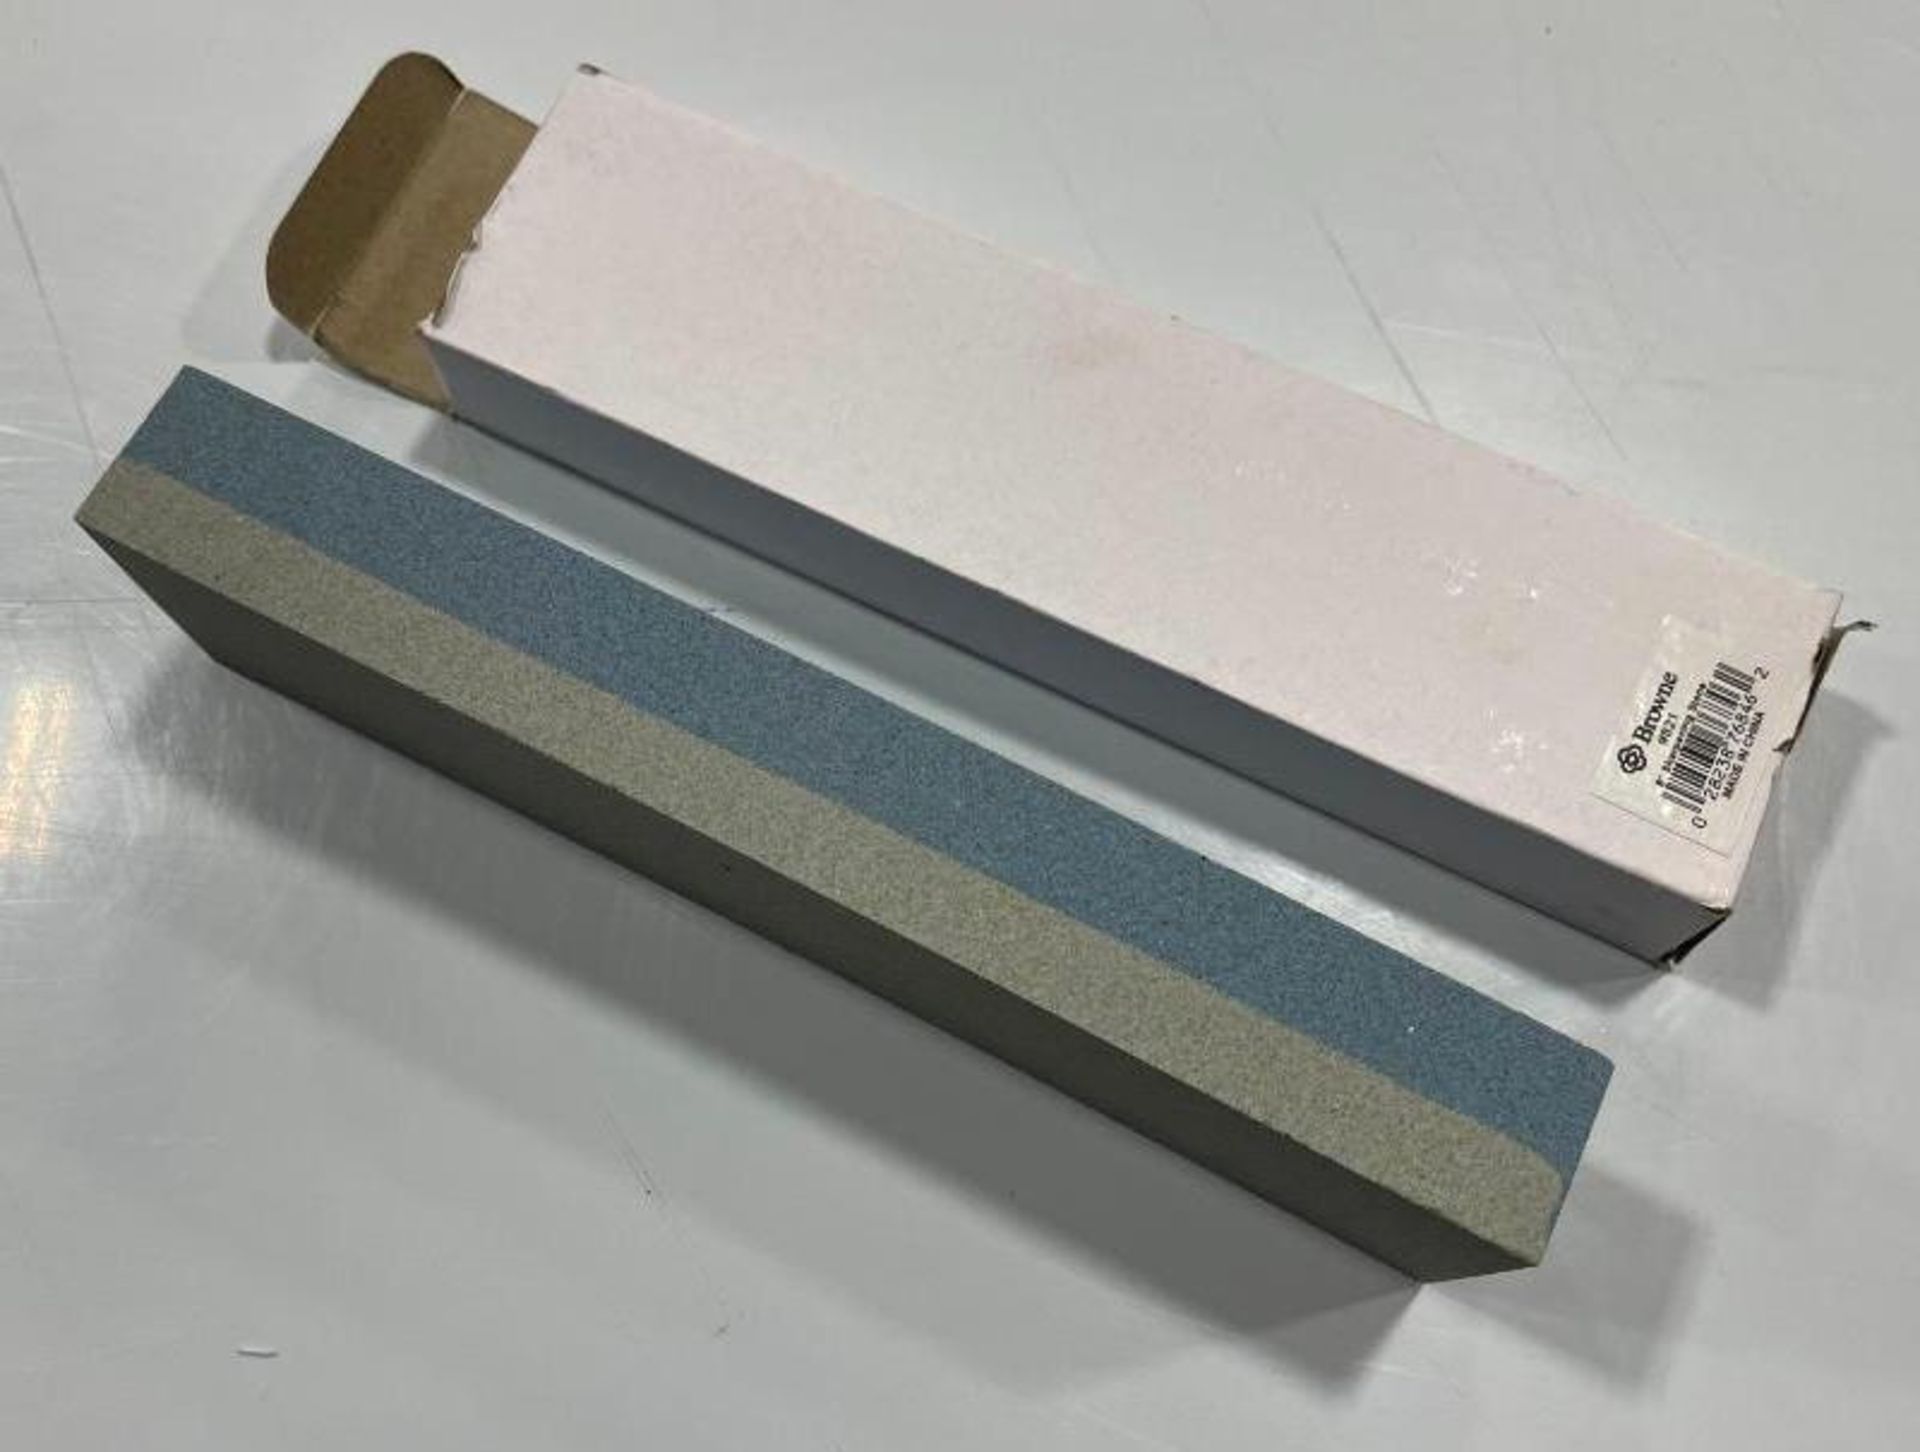 BROWNE 821 SILICON CARBIDE 8" SHARPENING STONE - Image 3 of 5